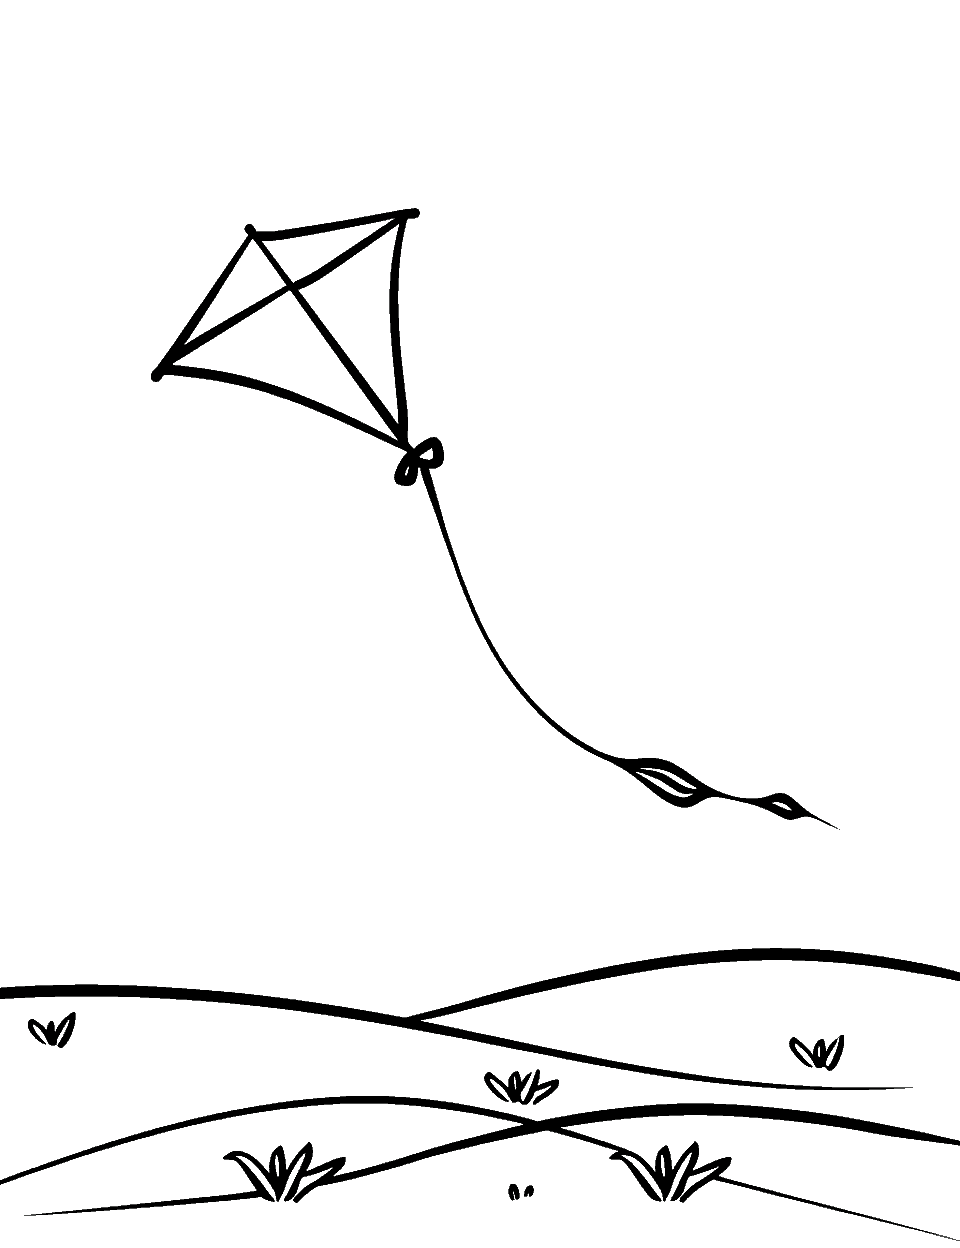 Kite Flying Day Coloring Page - A single kite flying in a clear sky.